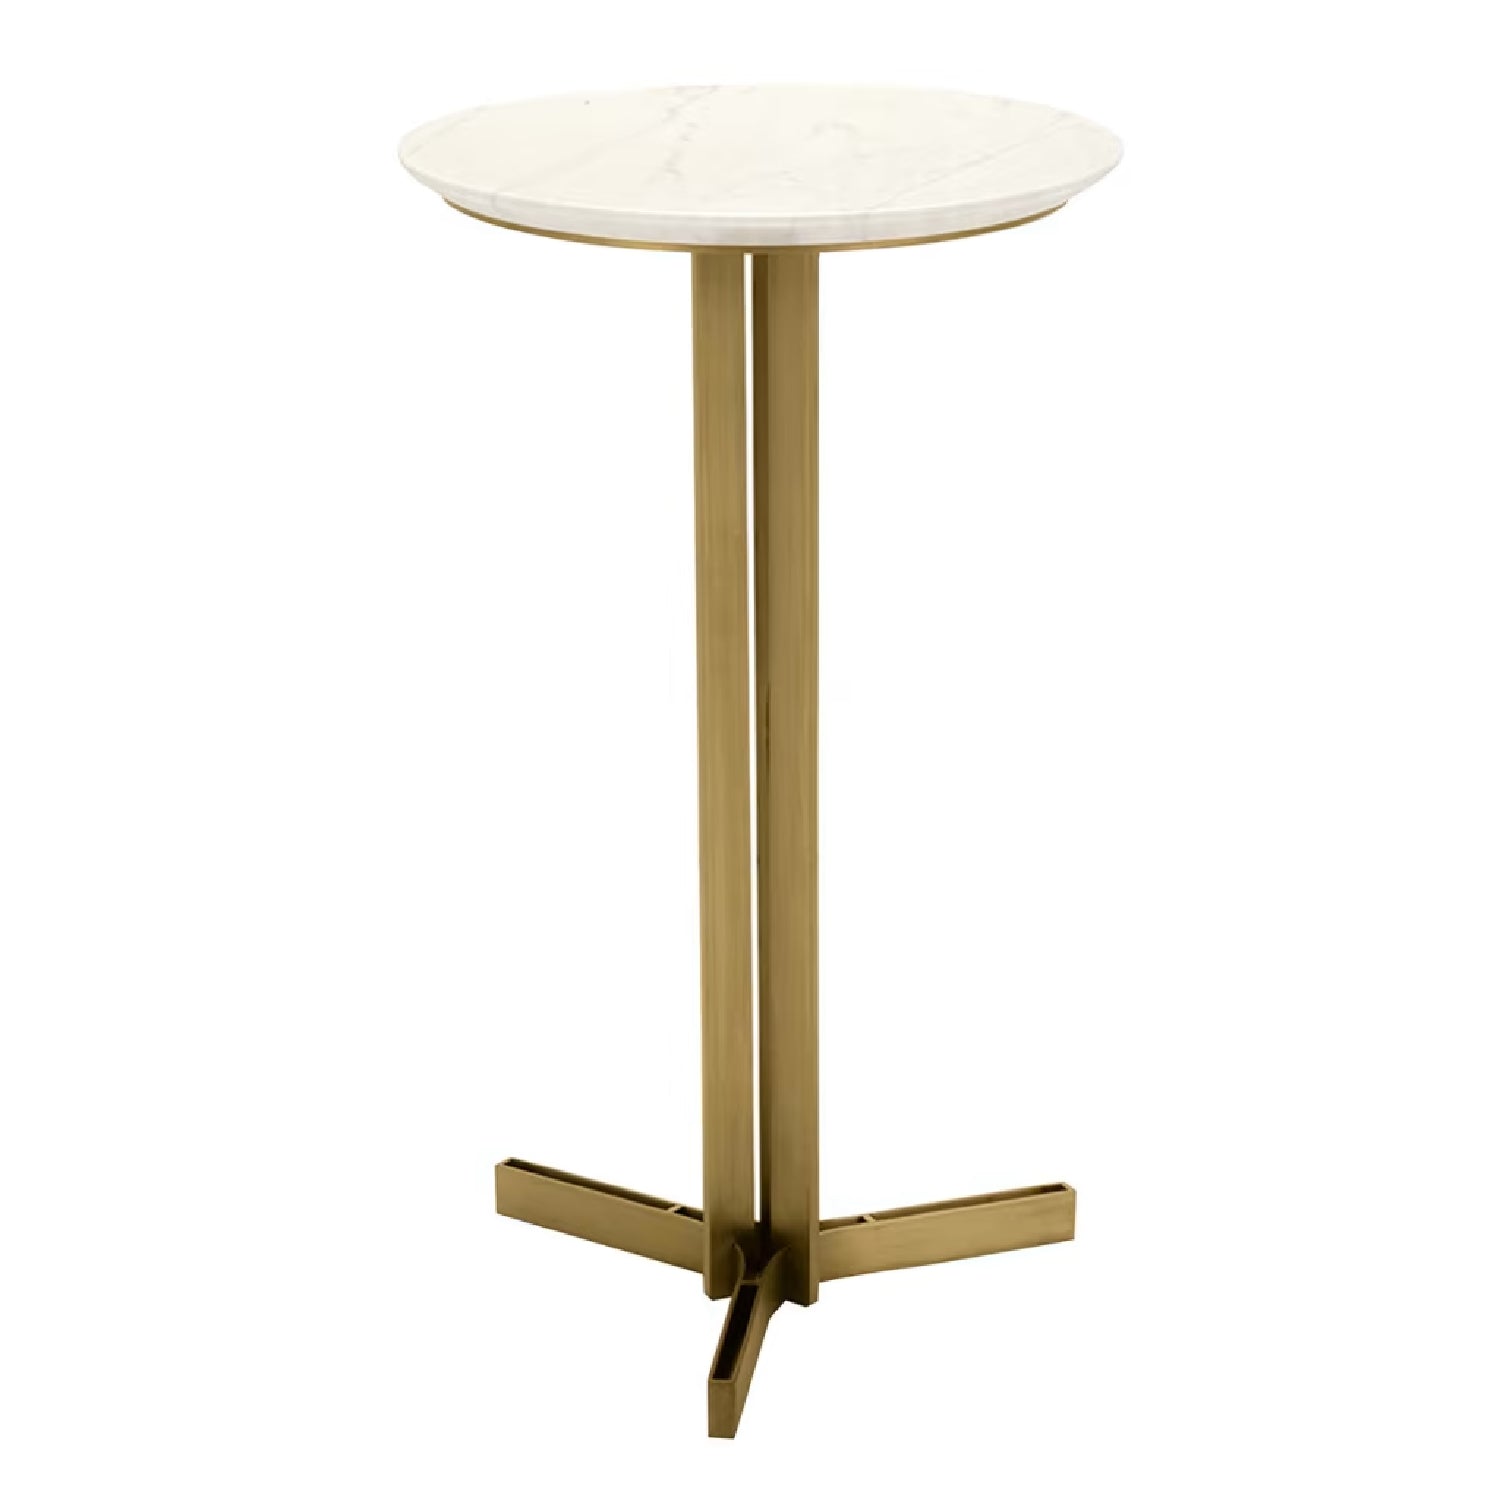 Ceo Cocktail Table with Calacatta Marble Top by Domingo Salotti